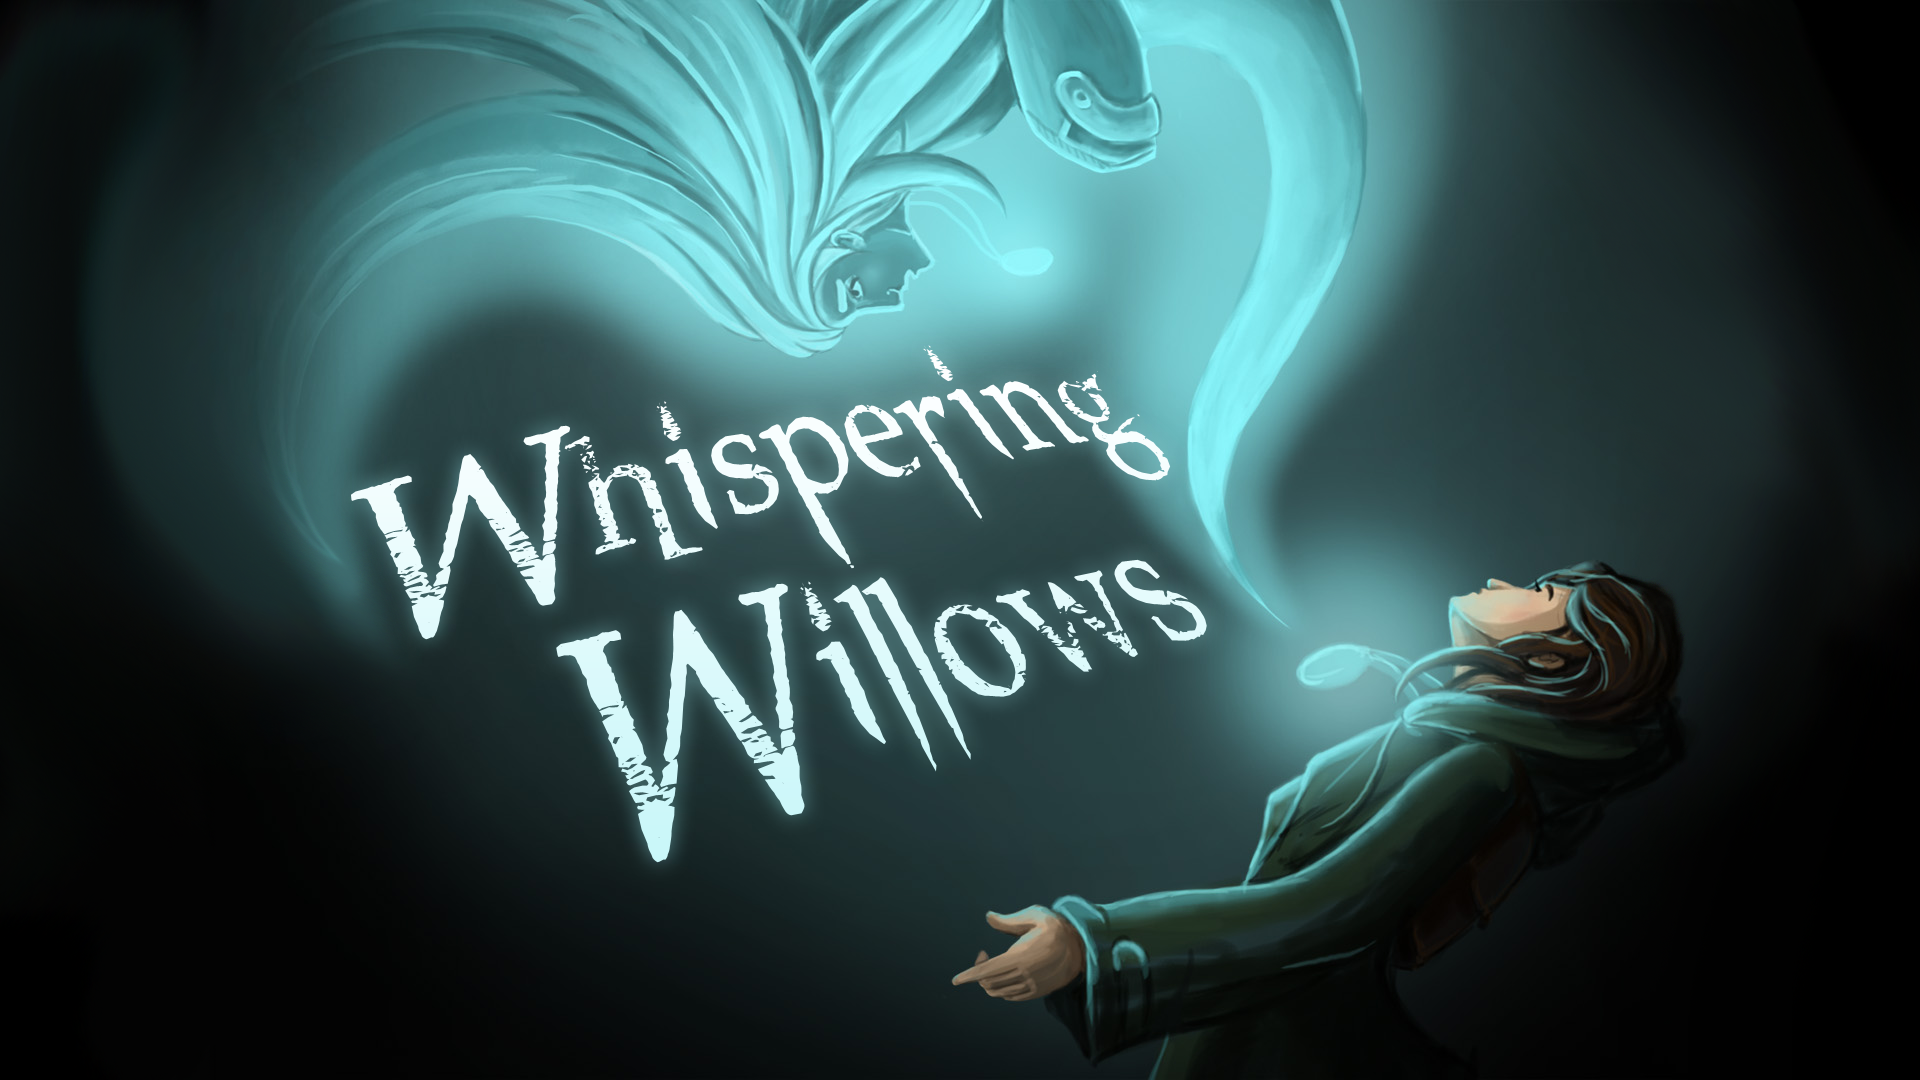 download the last version for iphoneWhispering Willows